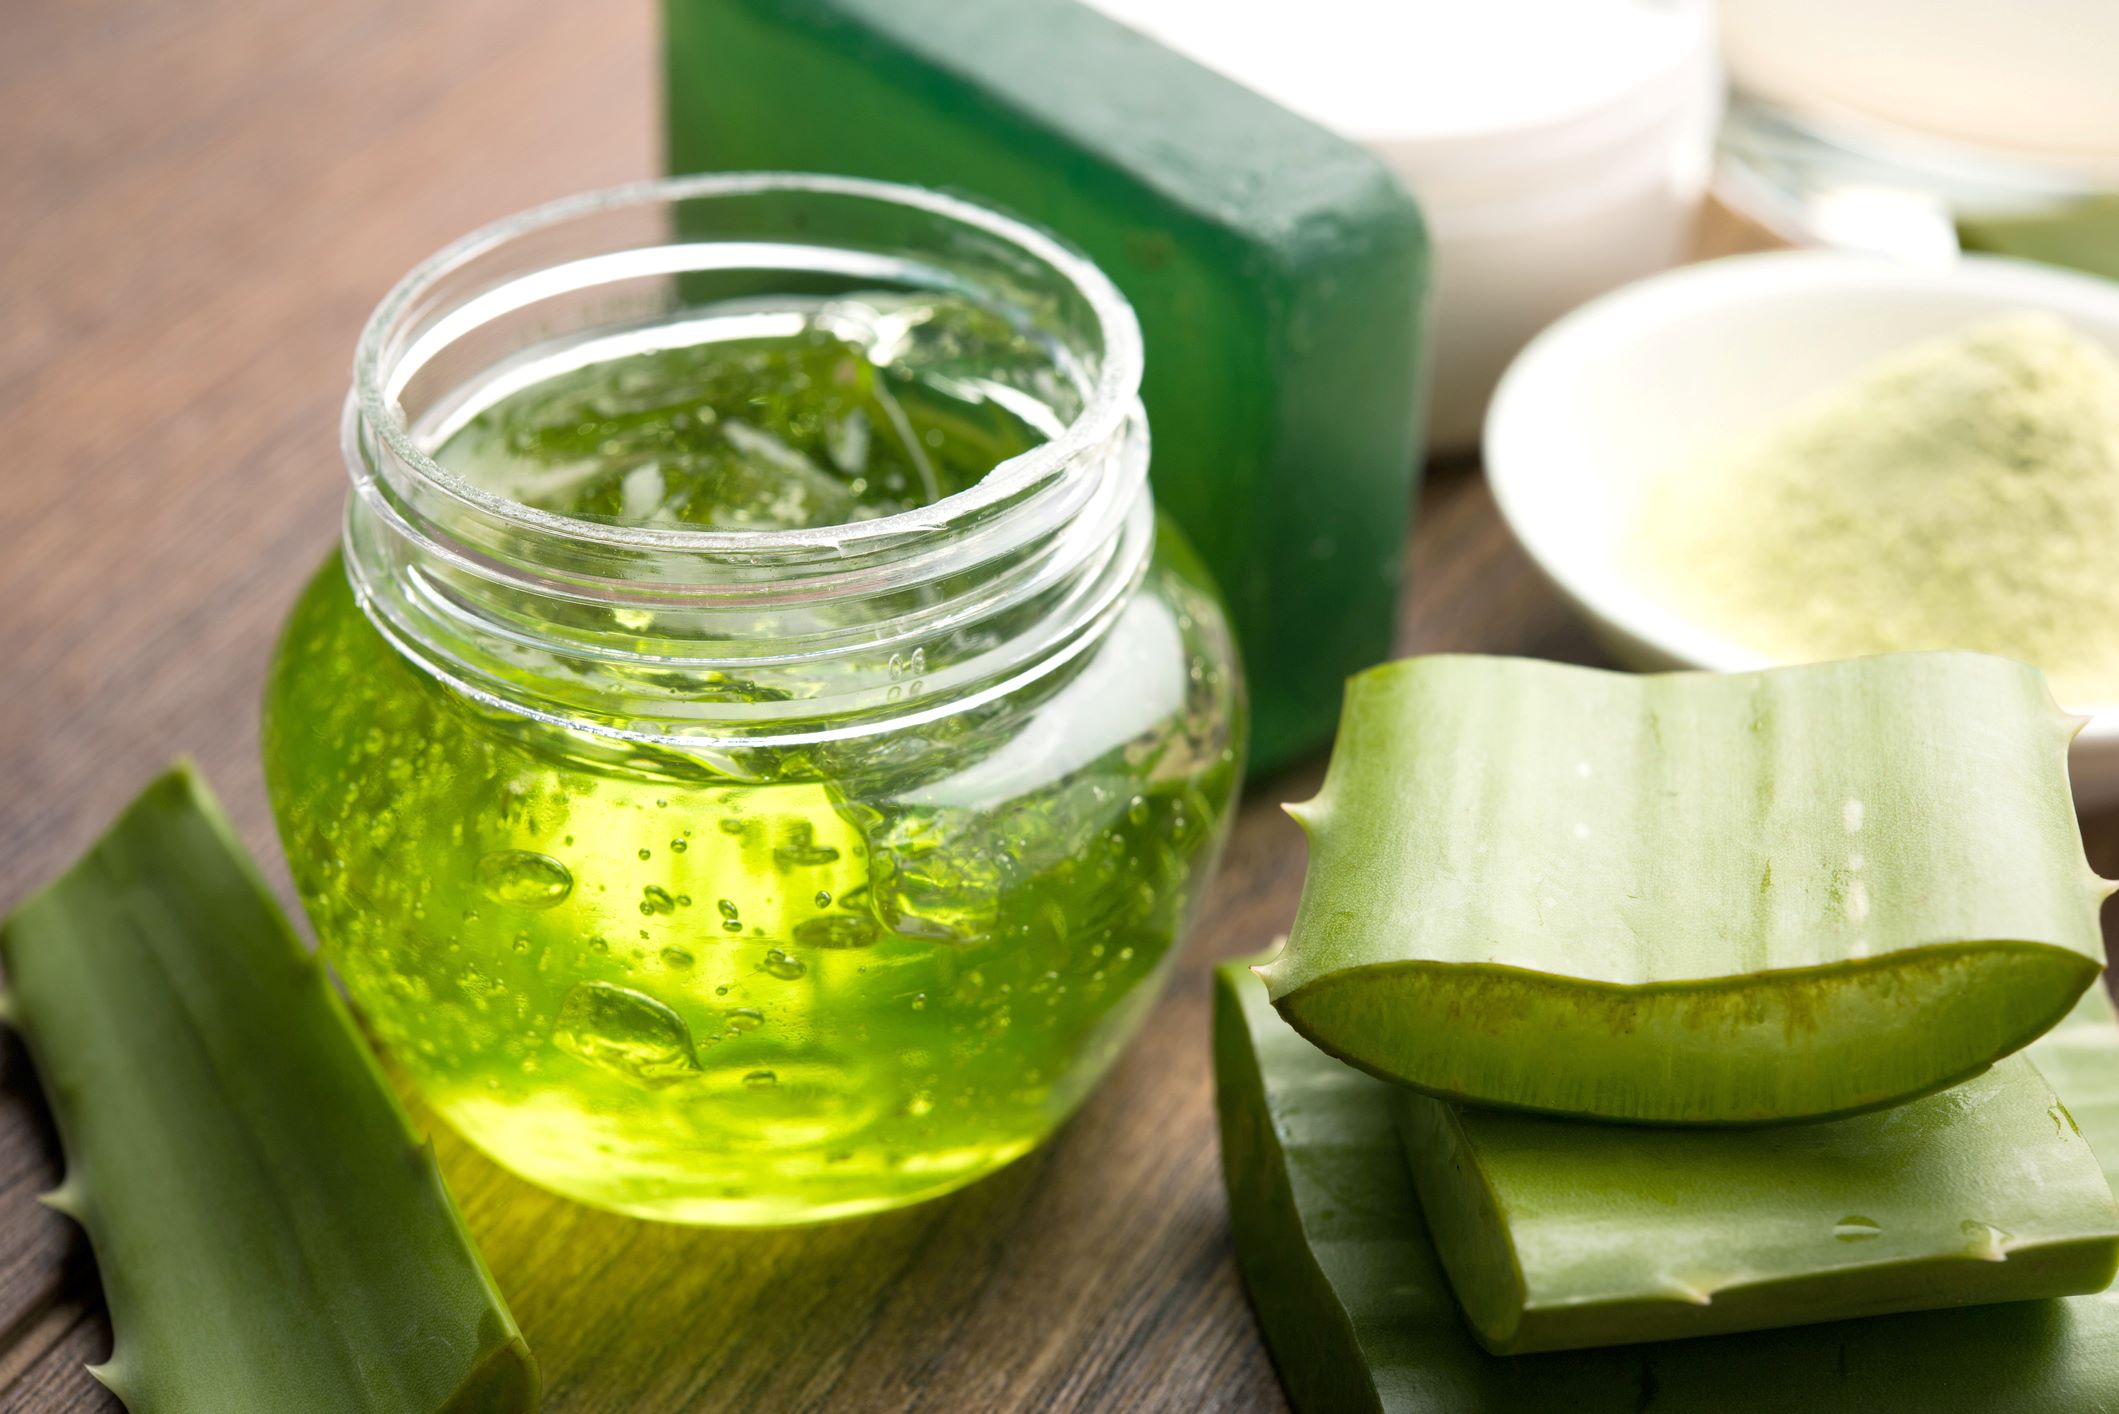 How To Store Aloe Vera Gel From Plant